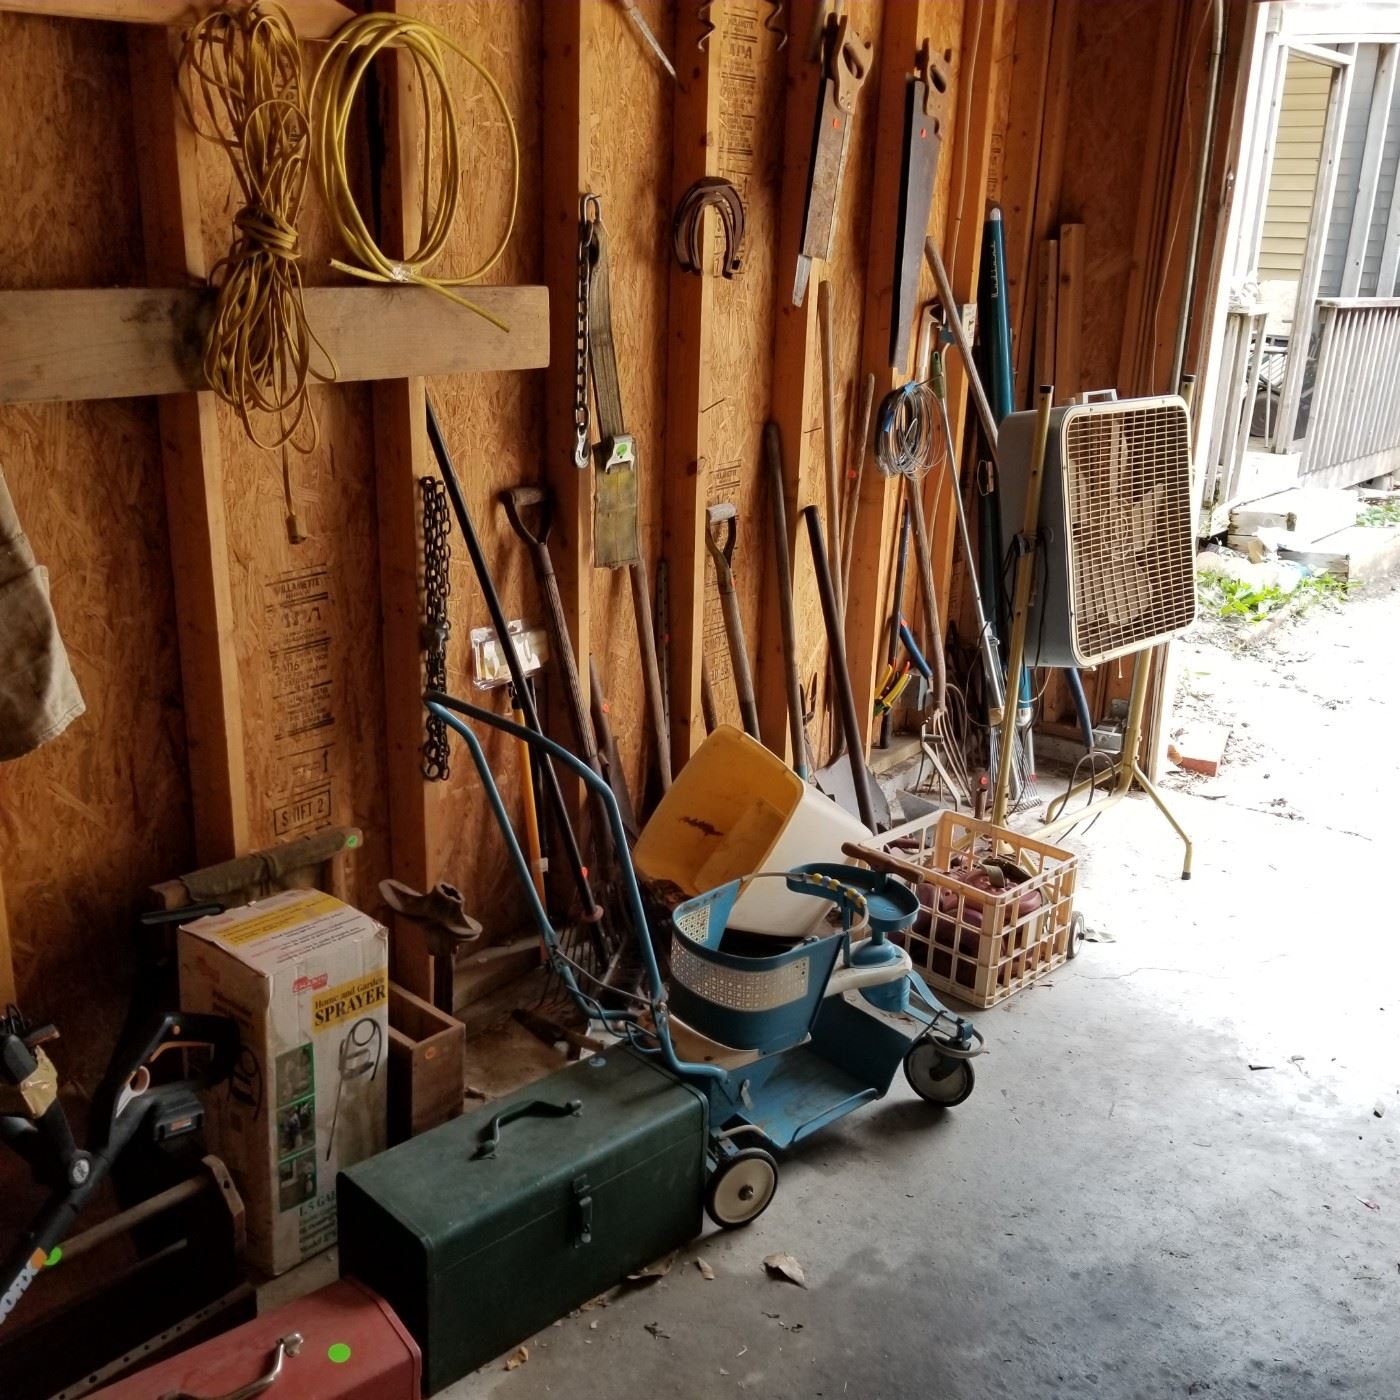 Tools for yard, vintage baby stroller, tool boxes with tools